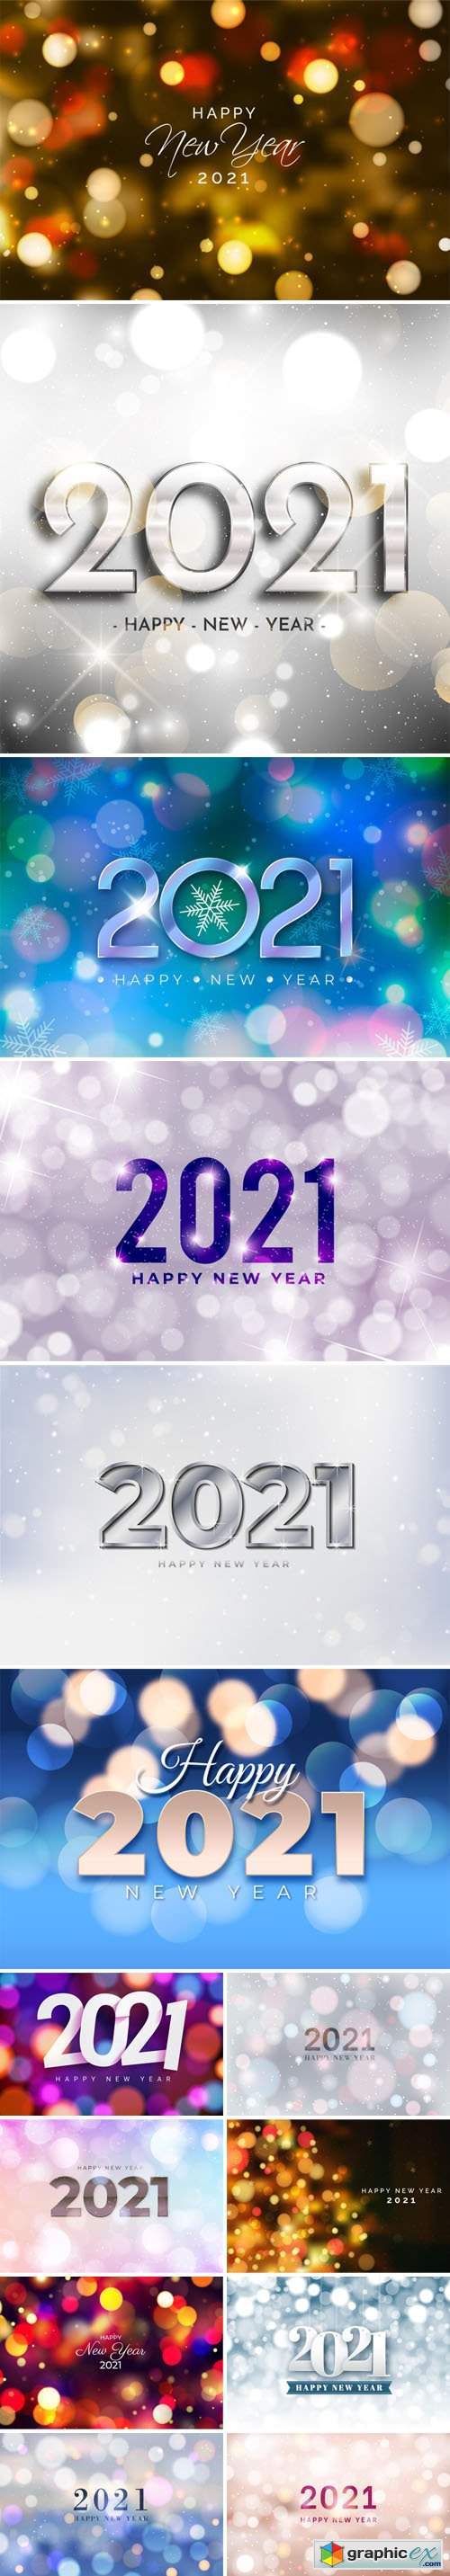 14 Happy New Year 2021 Vector Templates With Blurred Bokeh Lights